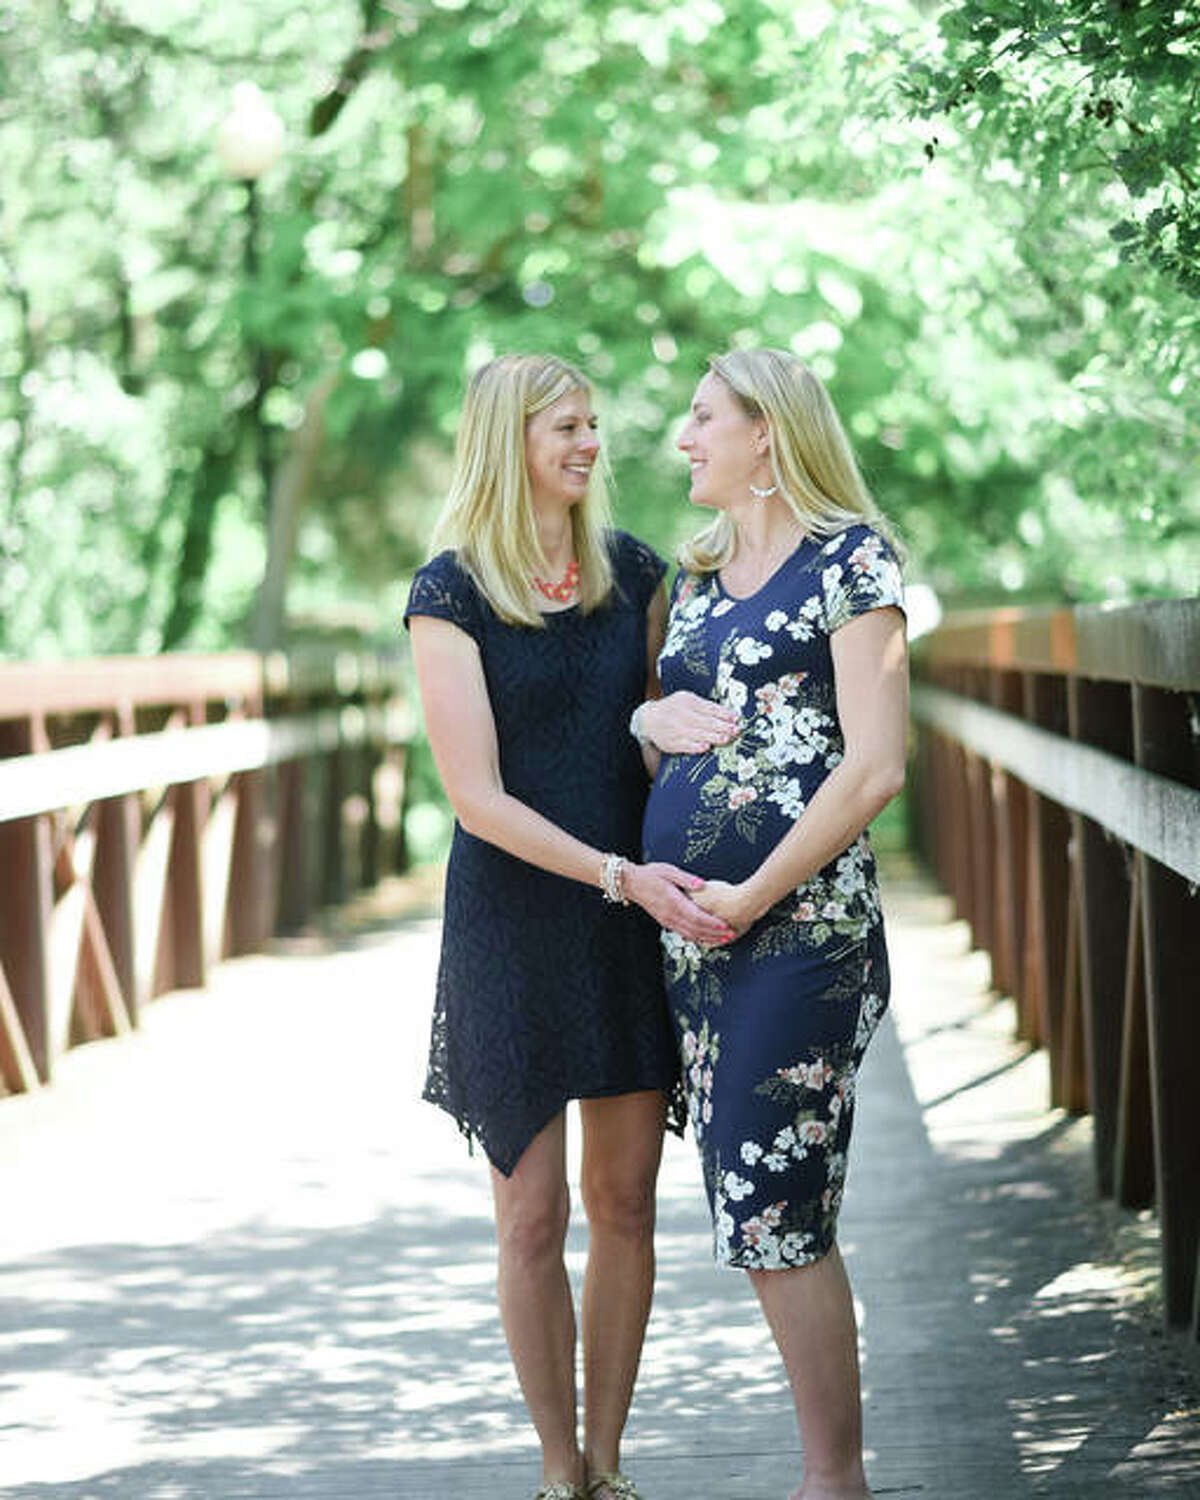 Edwardsville’s Kristin Stahlheber, right, with her sister, Megan Glassman, of Plainfield. Stahlheber, who is eight months pregnant, is serving as a surrogate for her sister, who is no longer able to have children due to heart issues.